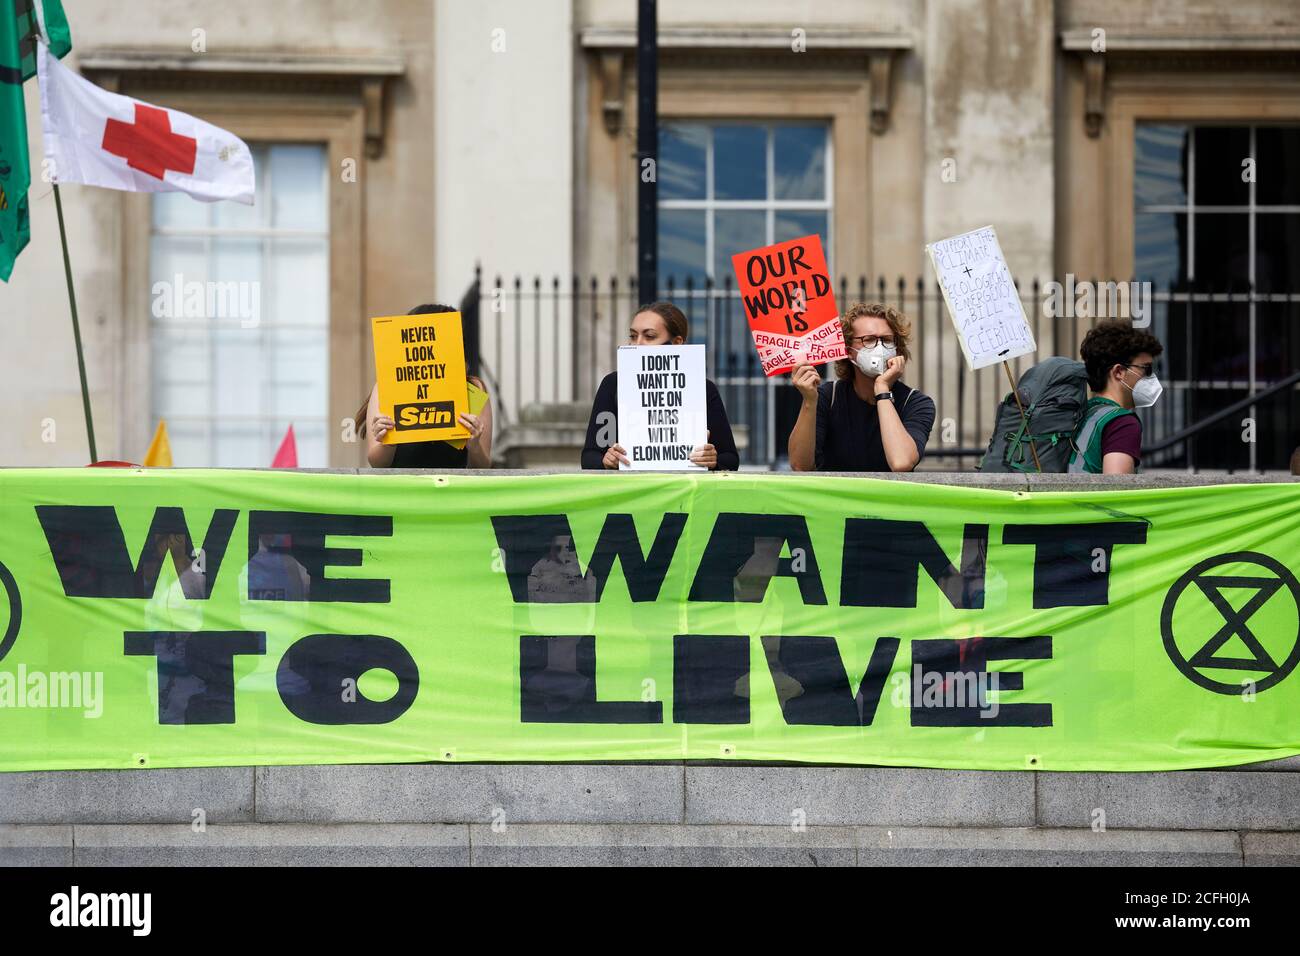 London, UK. - 5 Sept 2020: Protestors hold up placards at an Extinction Rebellion rally in Trafalgar Square. Stock Photo